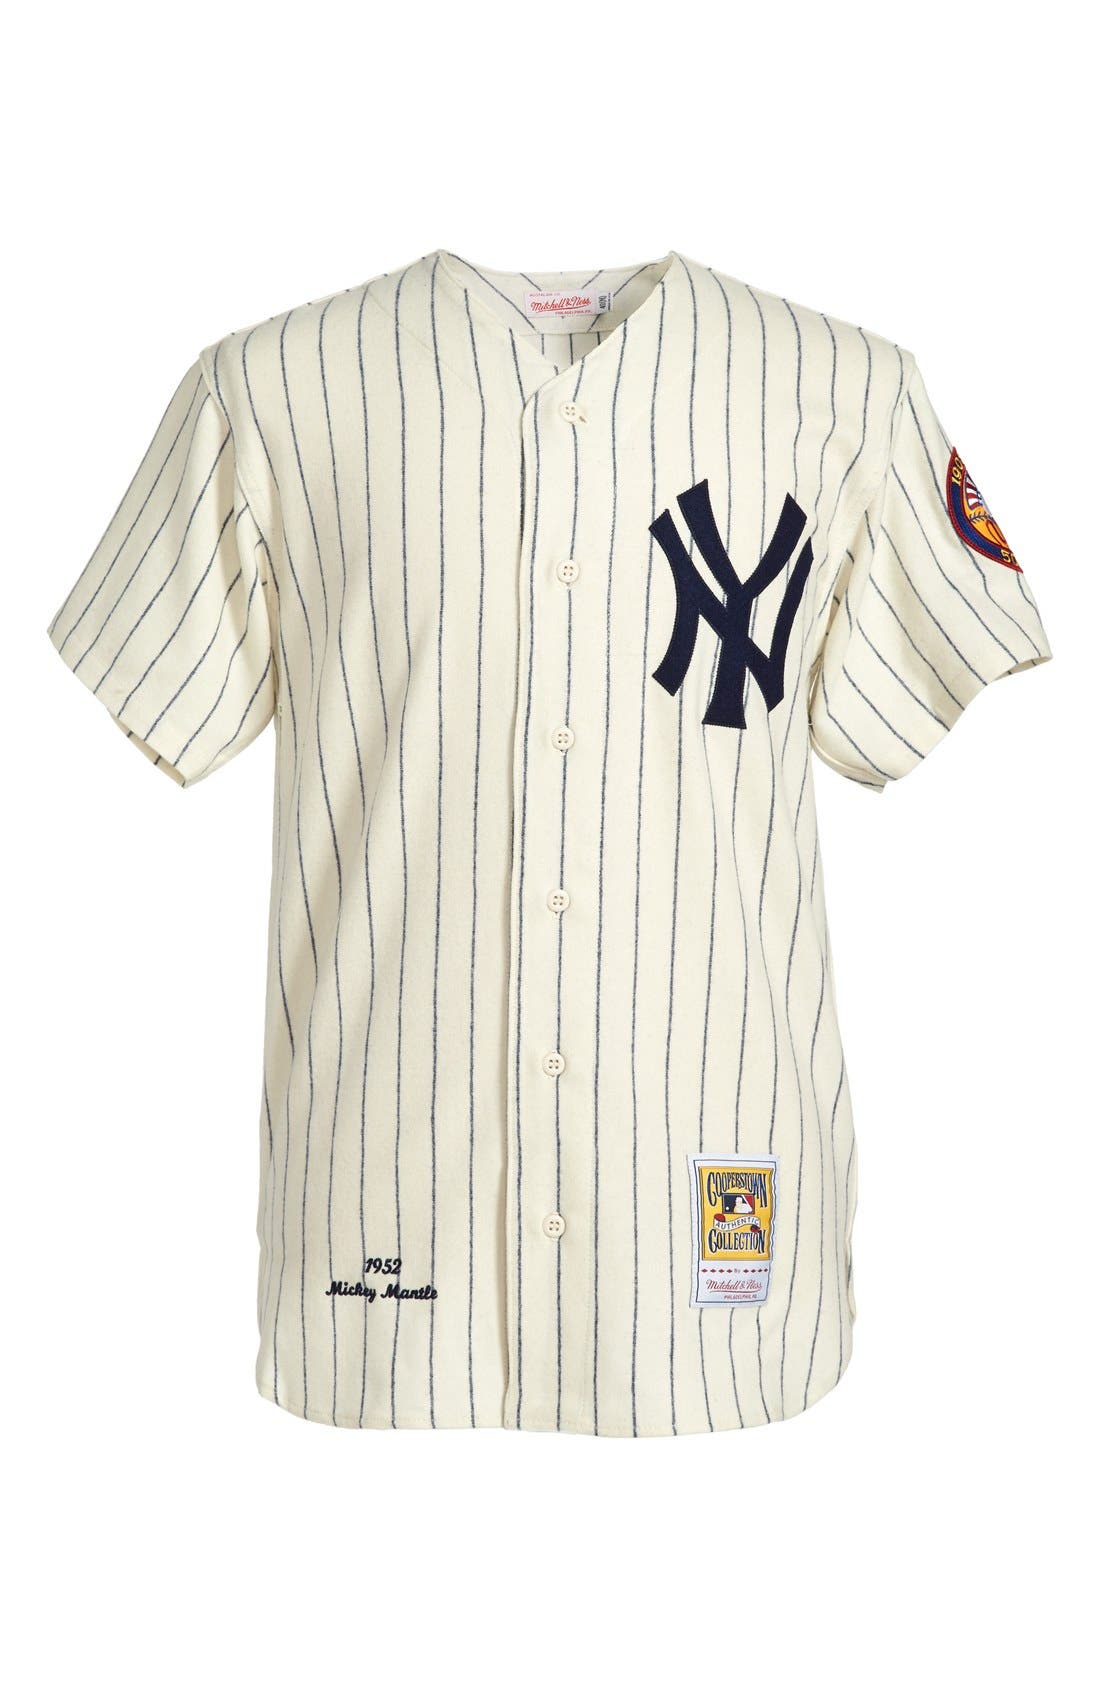 mickey mantle authentic jersey